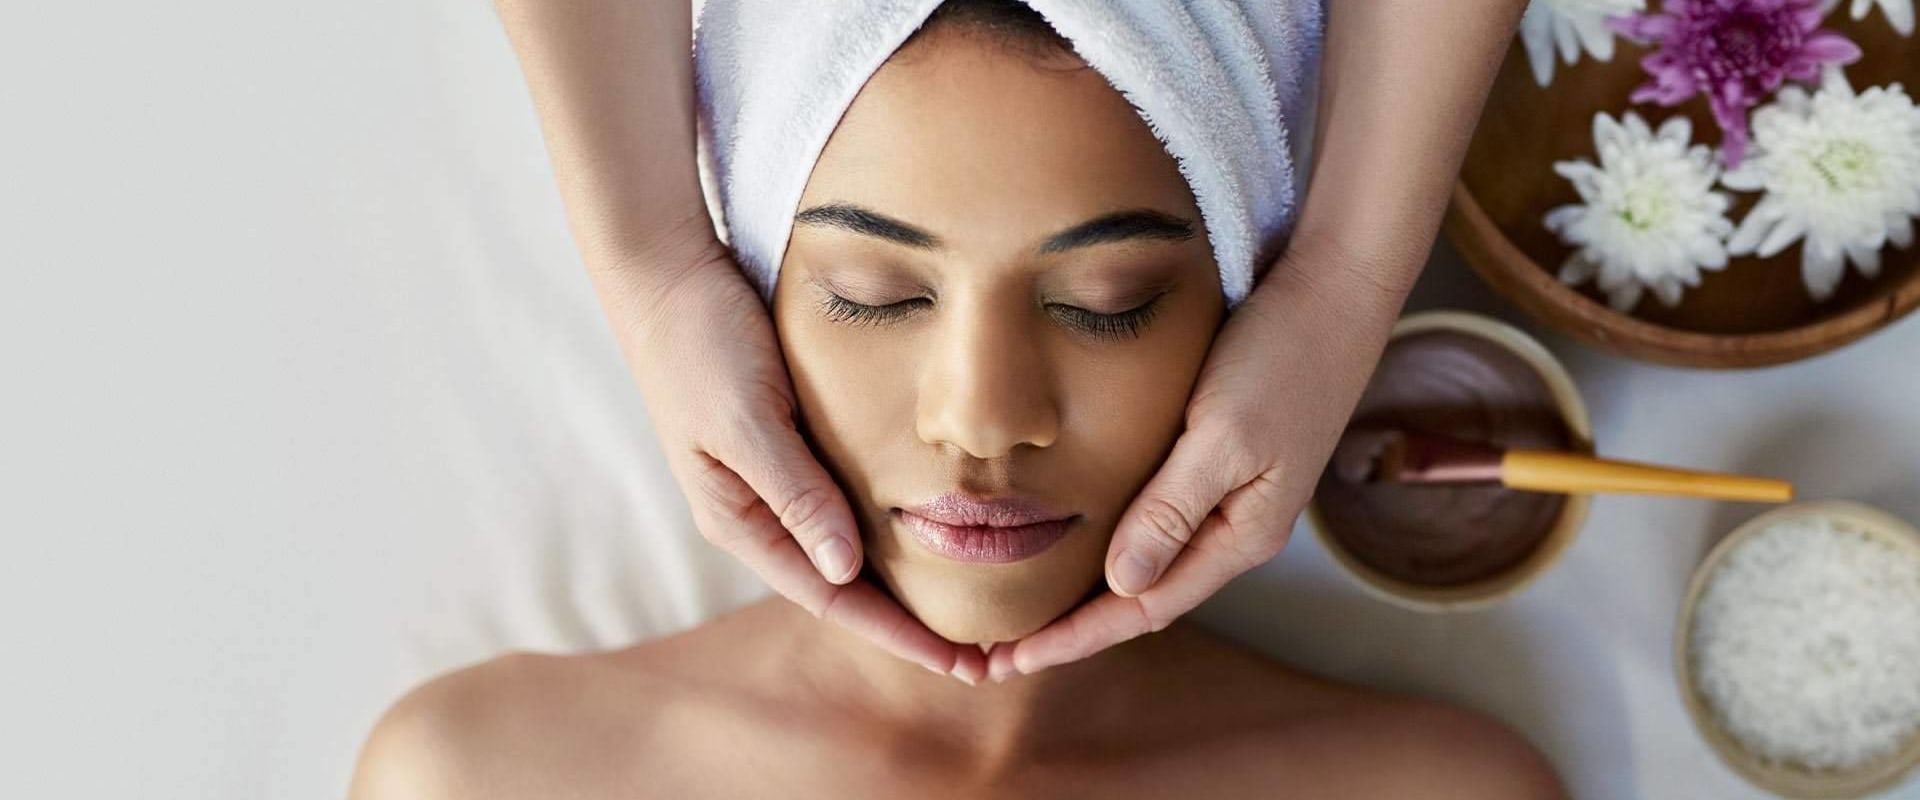 Facial Treatments and Skin Care: Benefits Explored